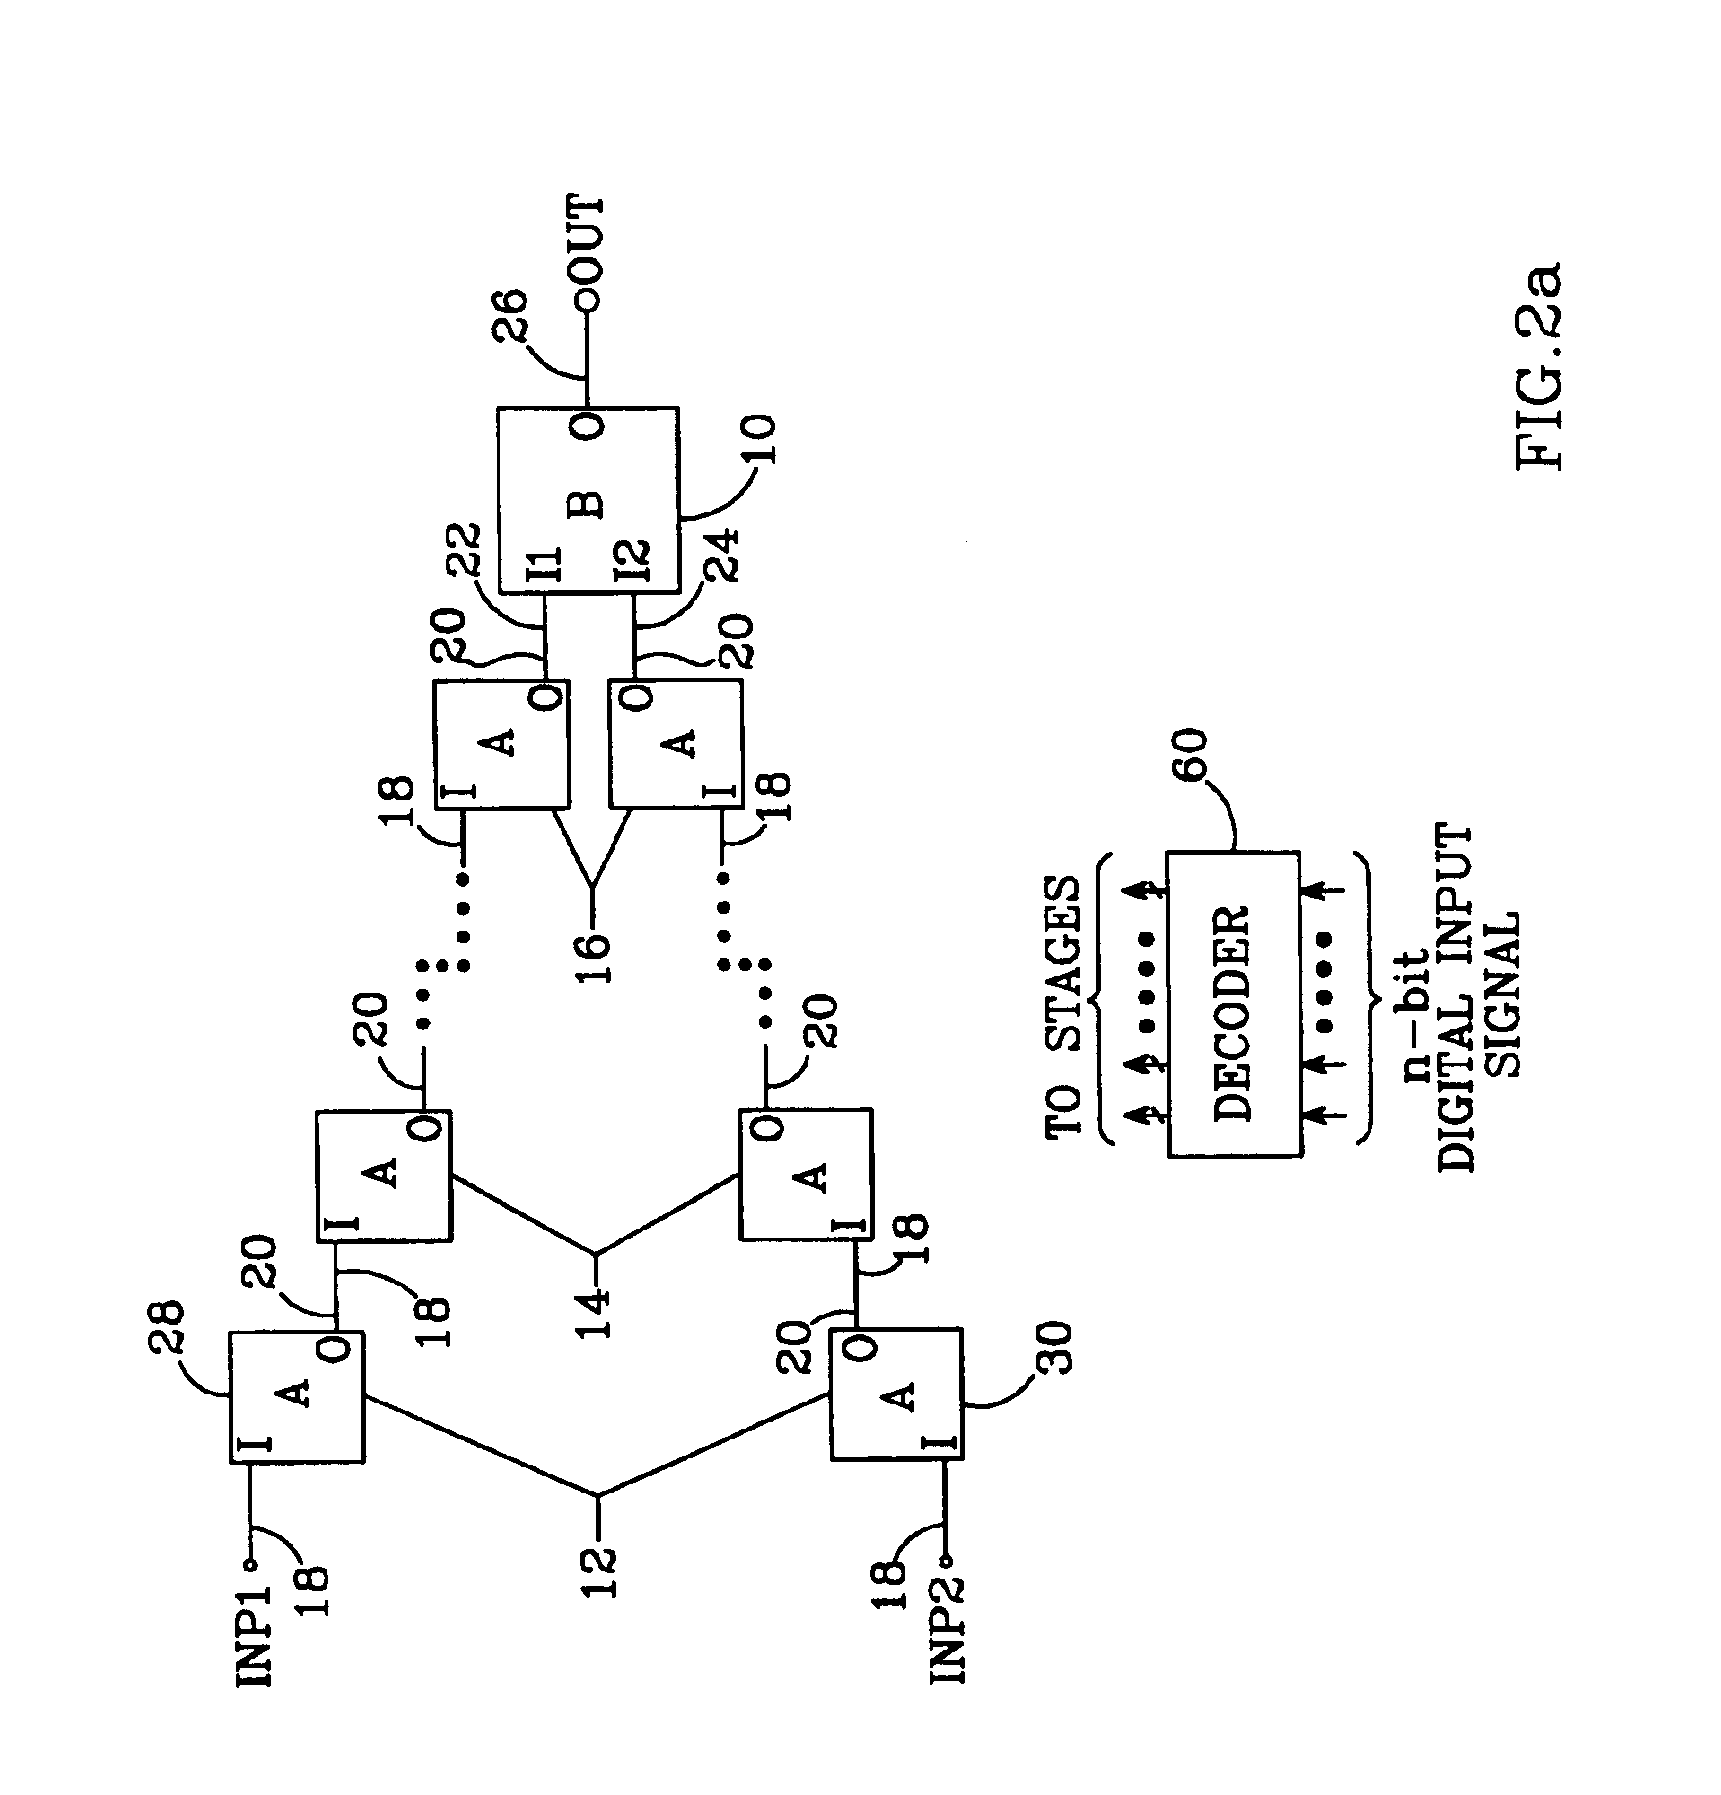 Digitally-switched impedance with multiple-stage segmented string architecture